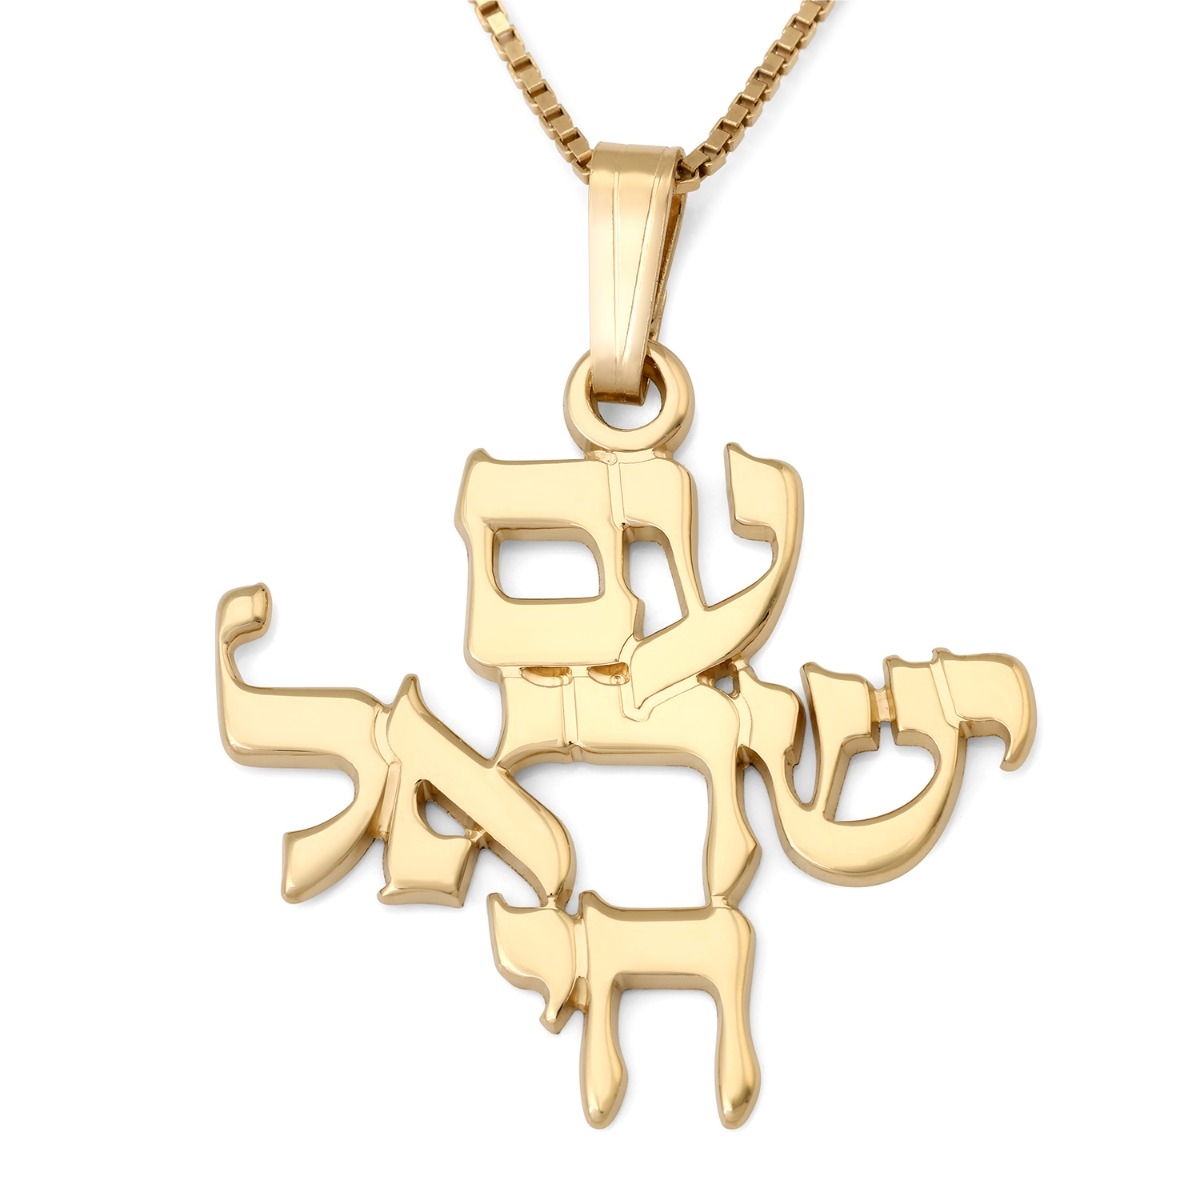 Unisex Am Yisrael Chai Necklace - Silver or Gold-Plated - 1